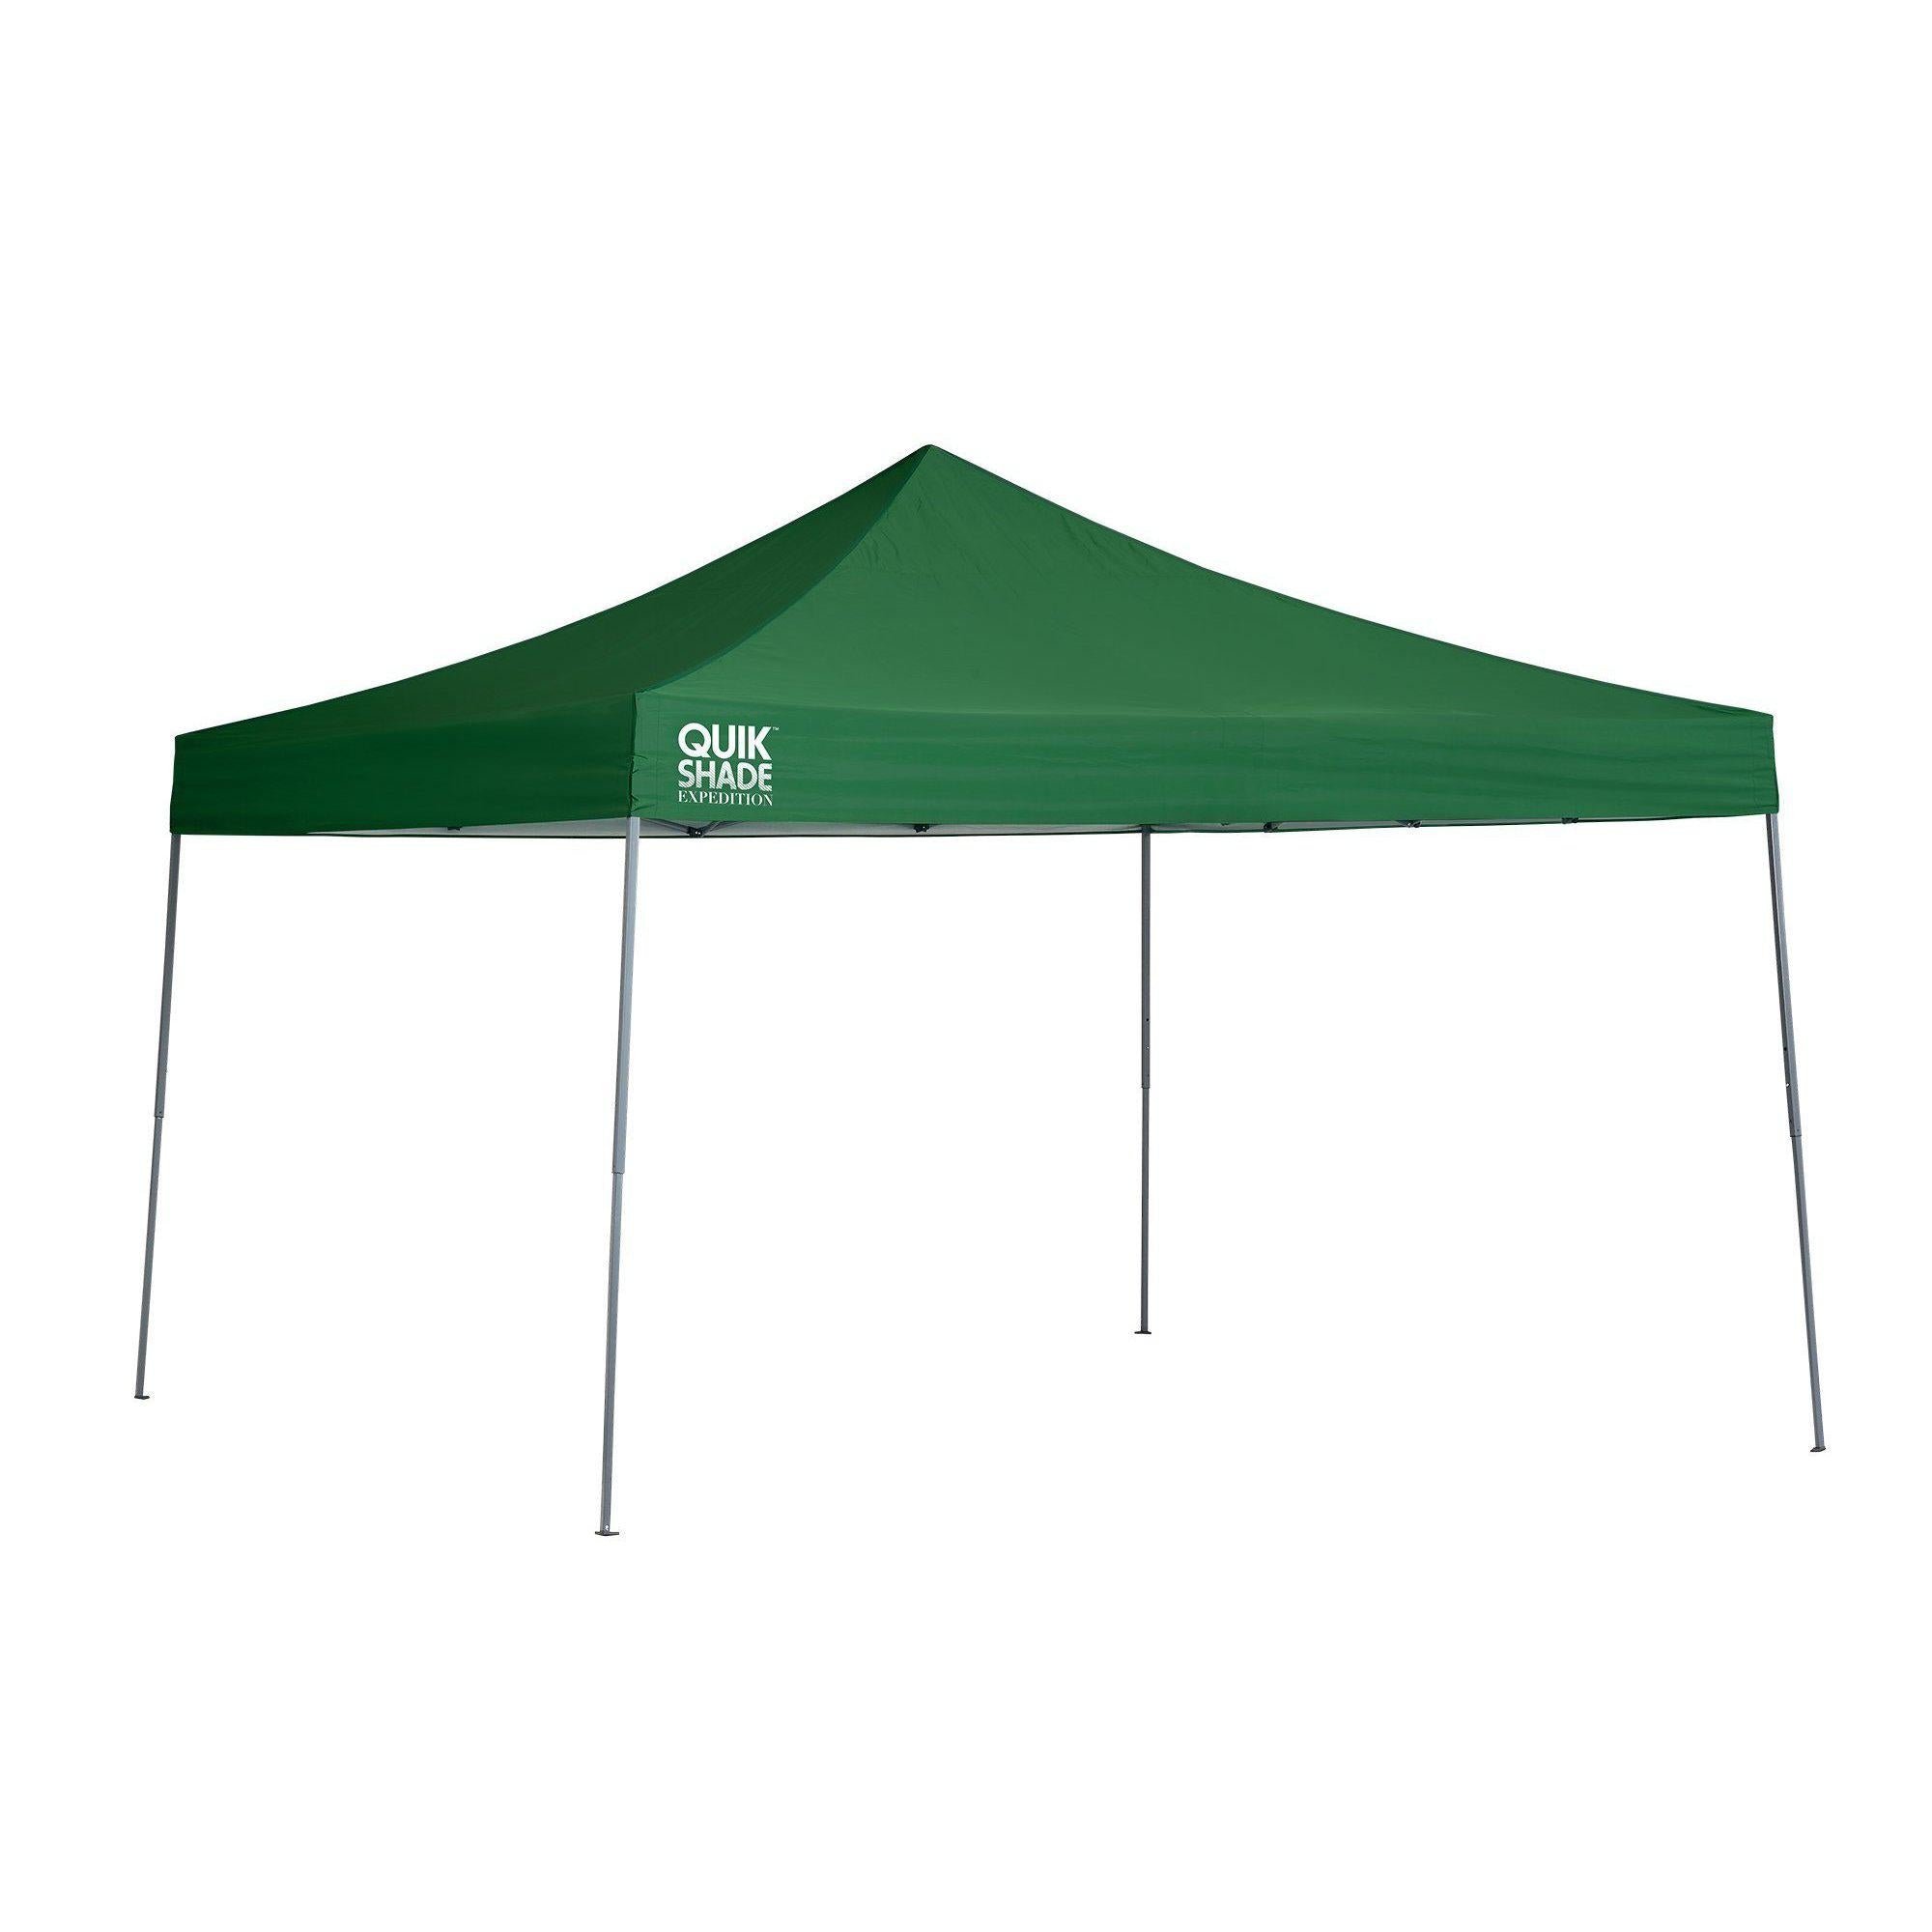 Quik Shade Expedition 12 x 12 ft. Straight Leg Canopy, Green